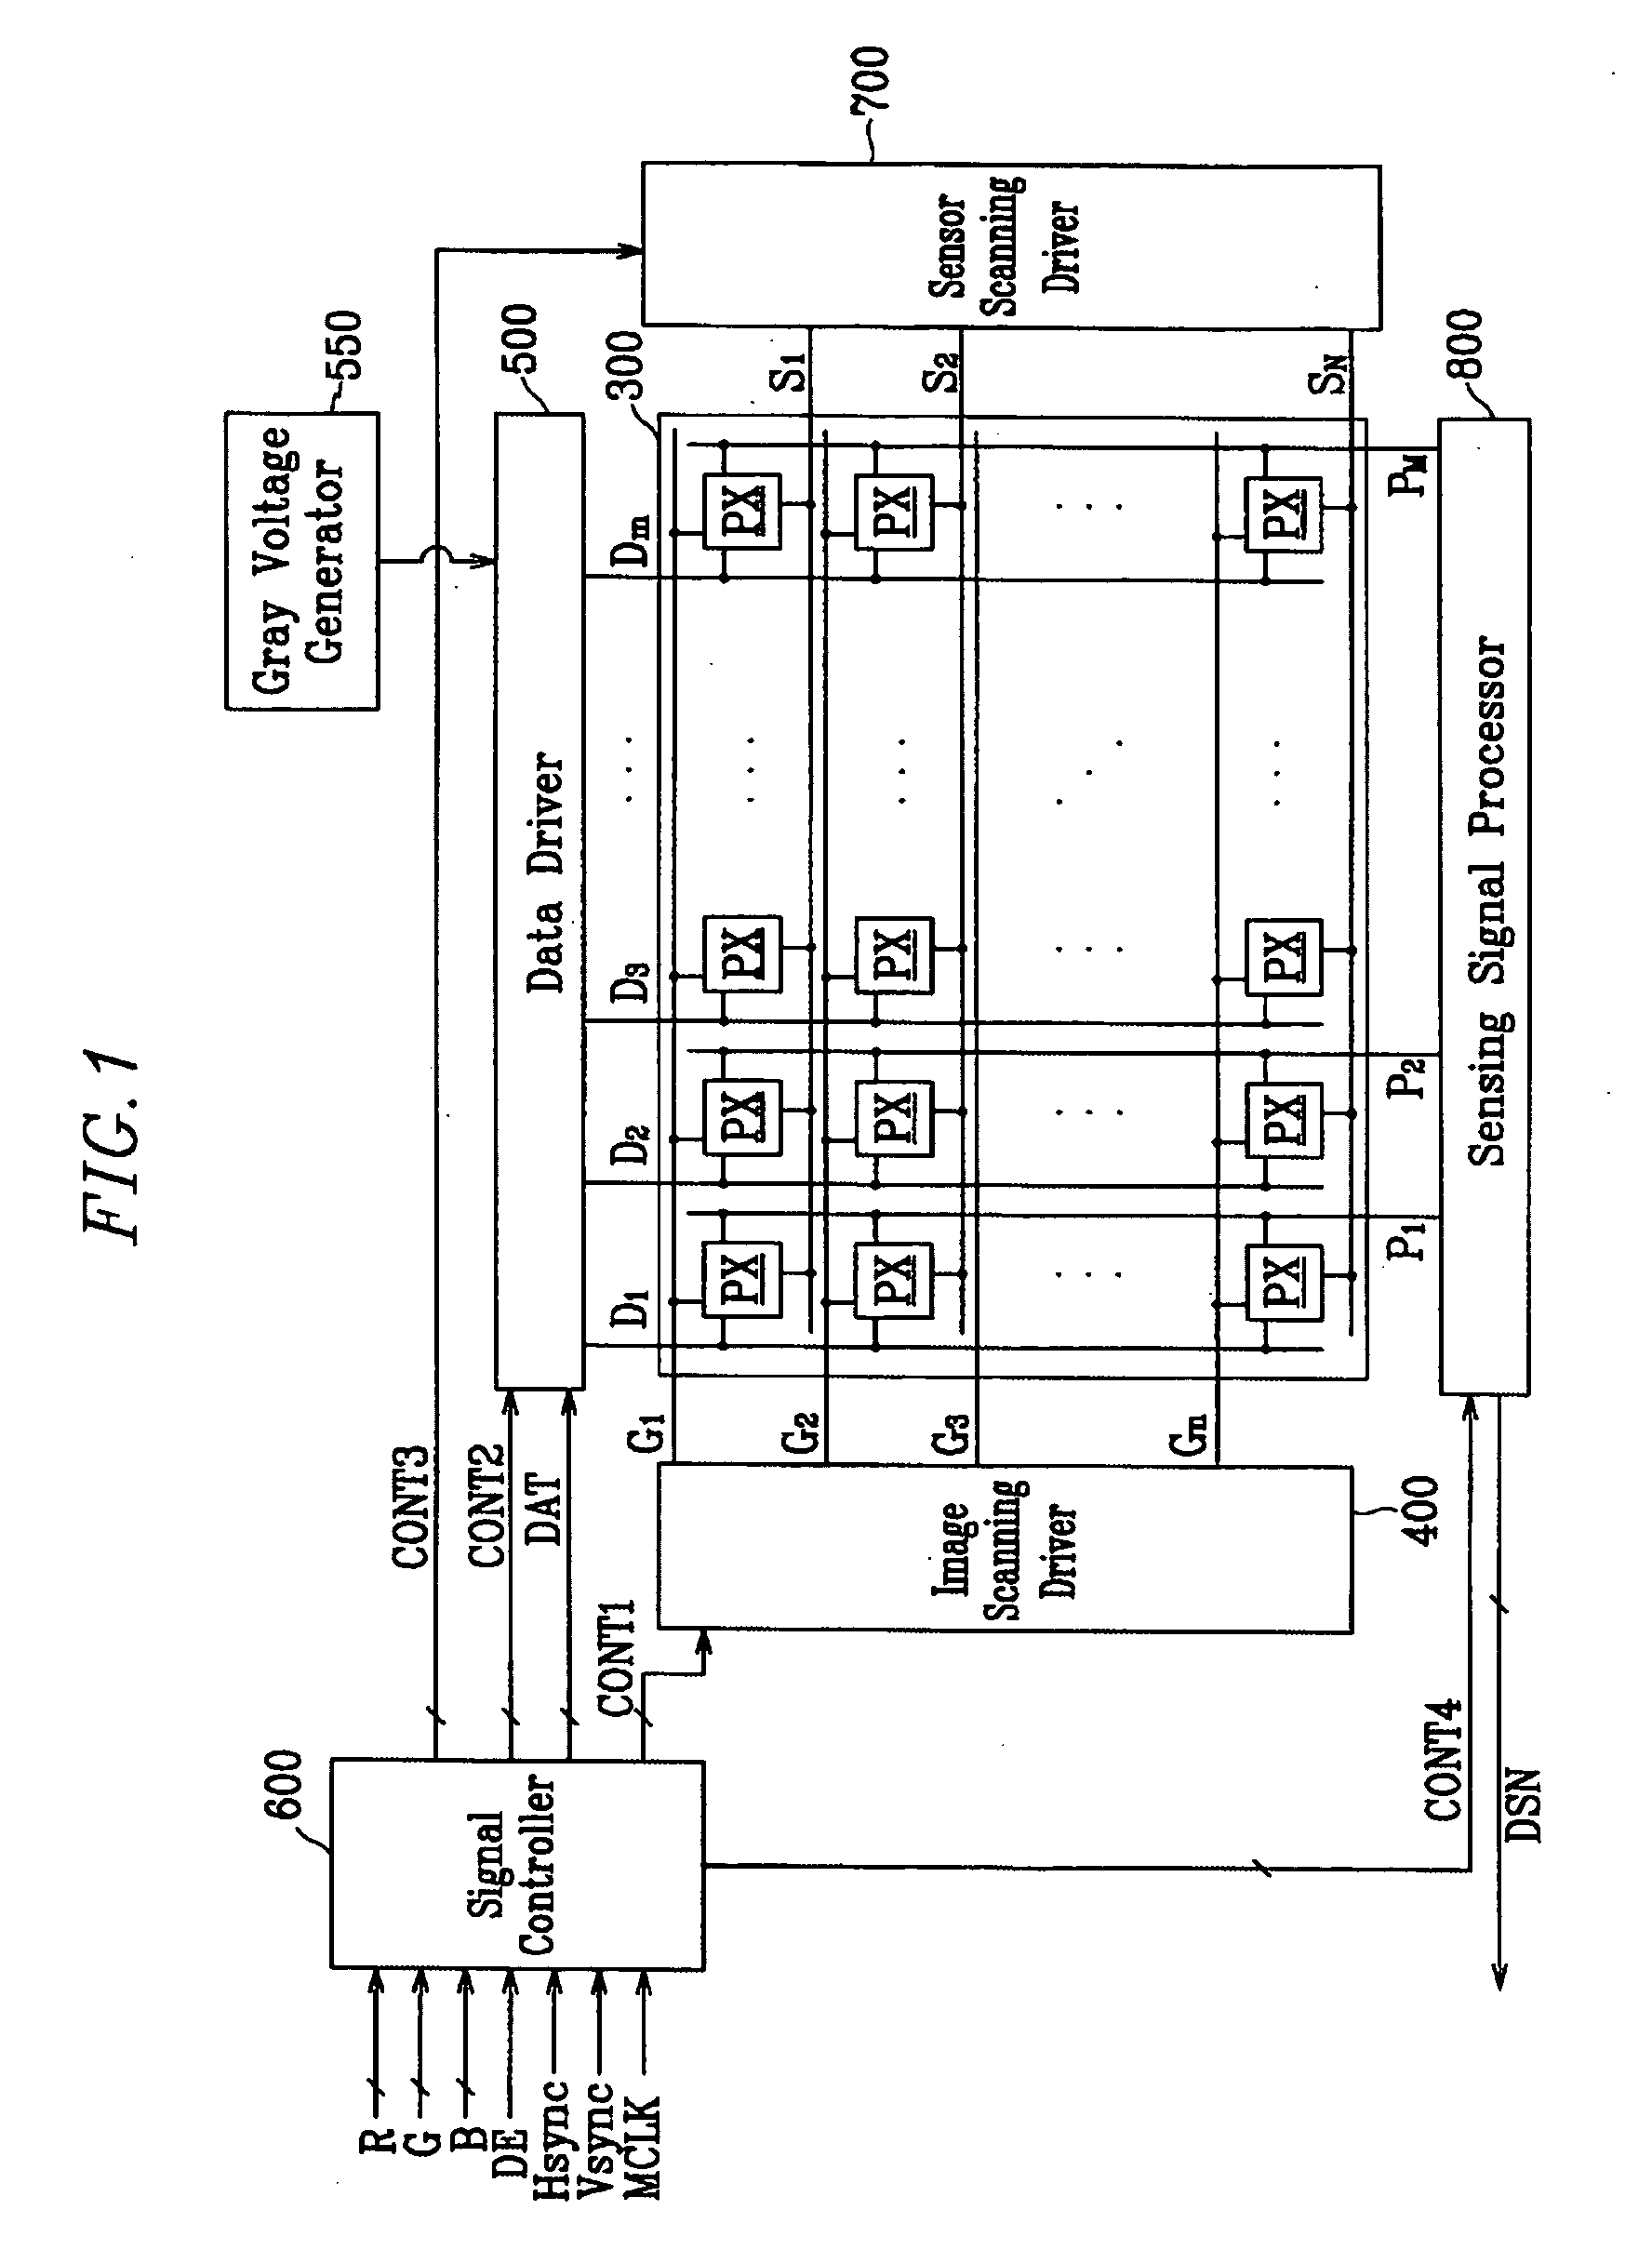 Display device including sensing elements